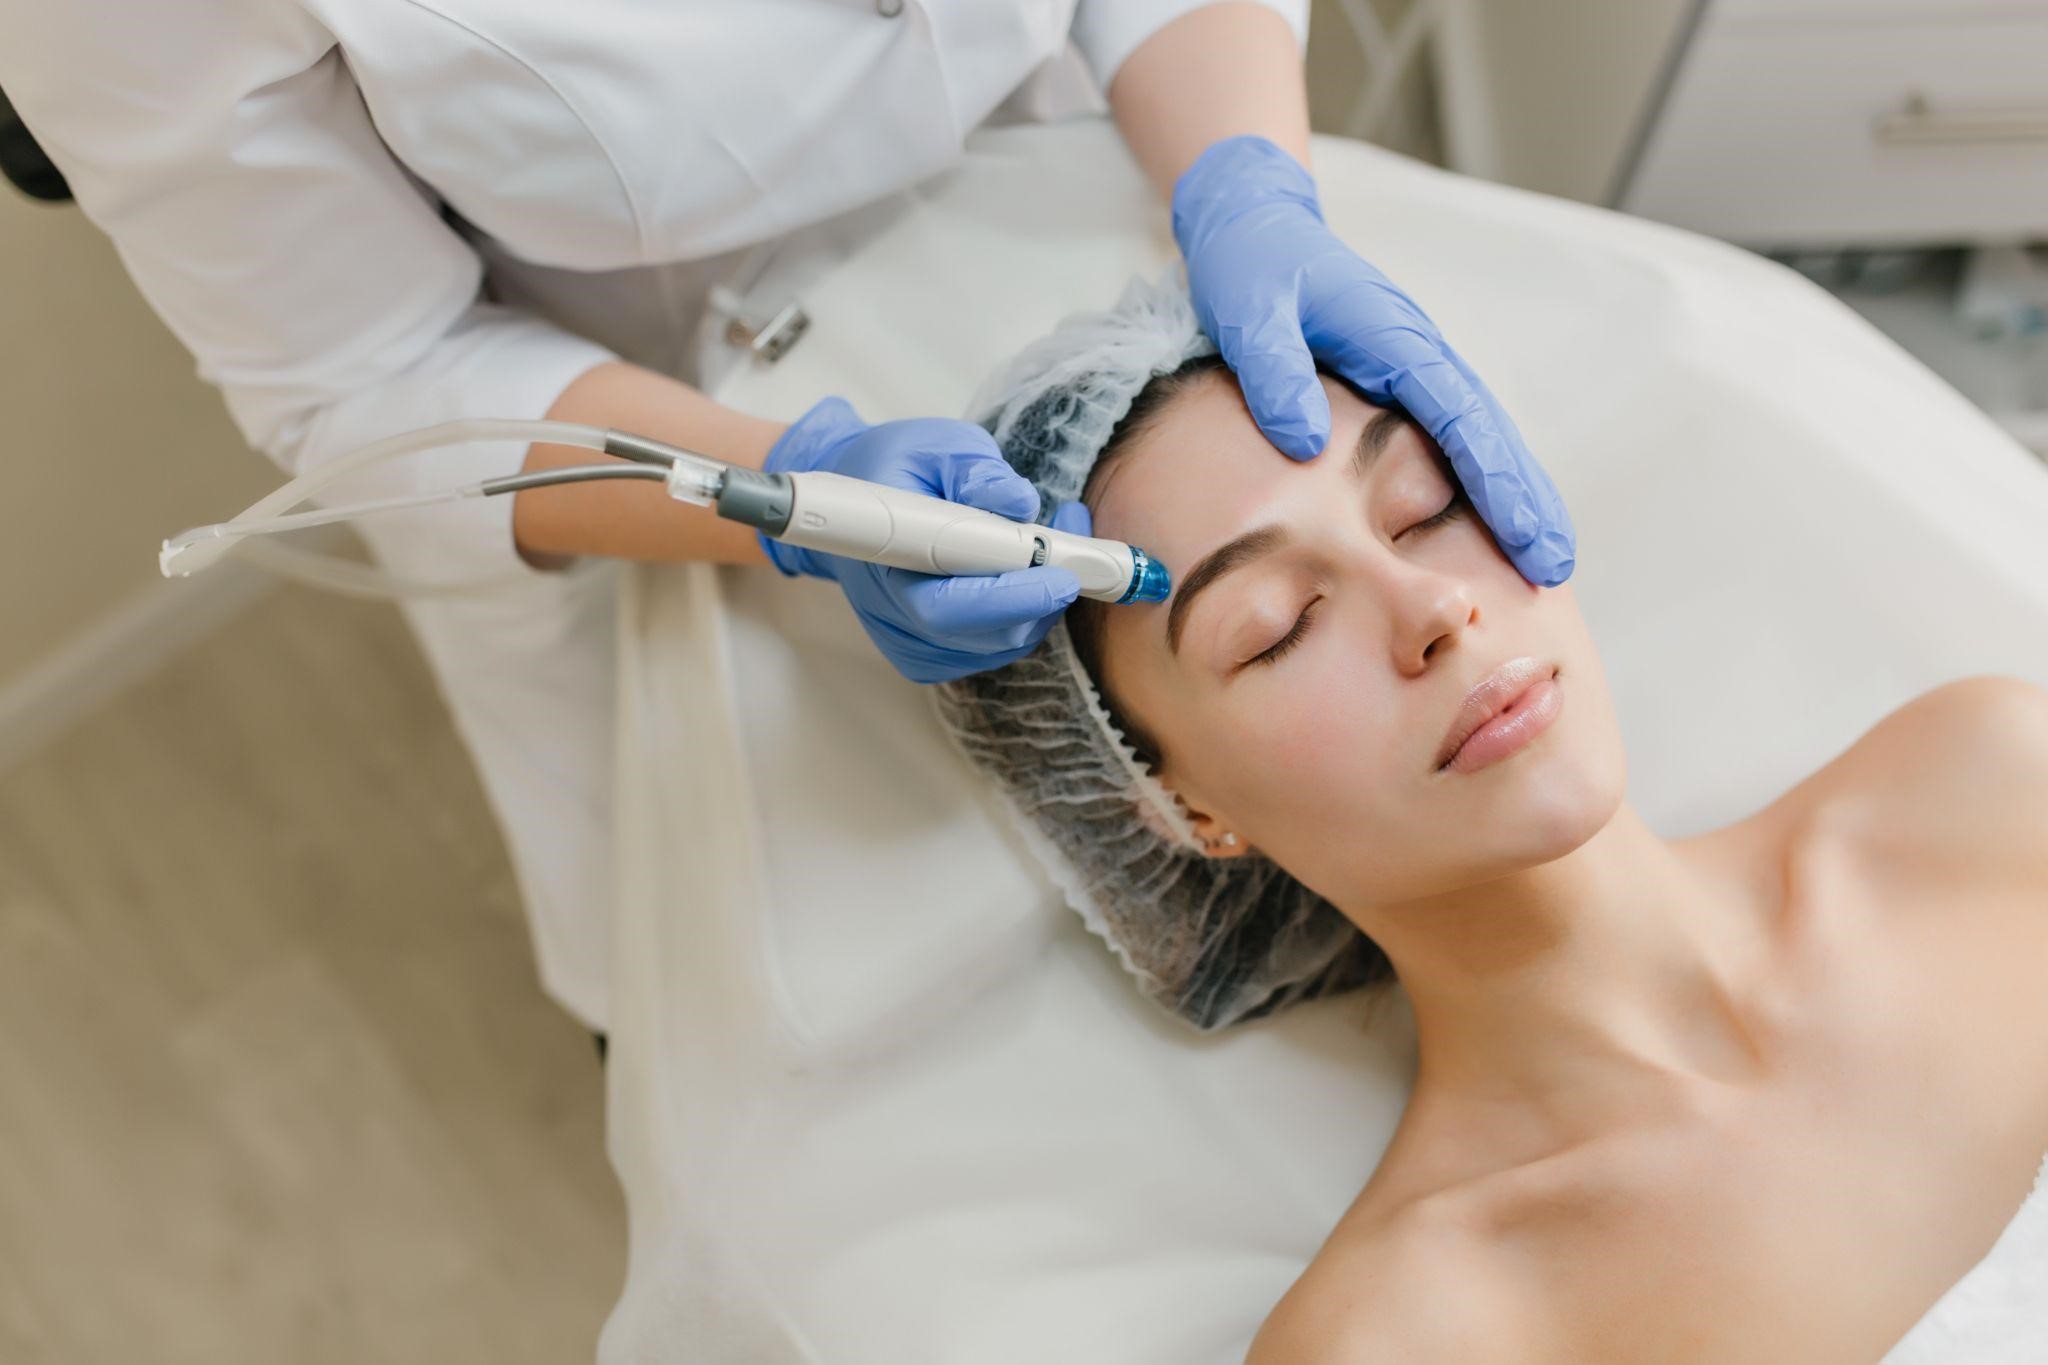 All About Skin resurfacing, microdermabrasion, skin firming and under eye darkness